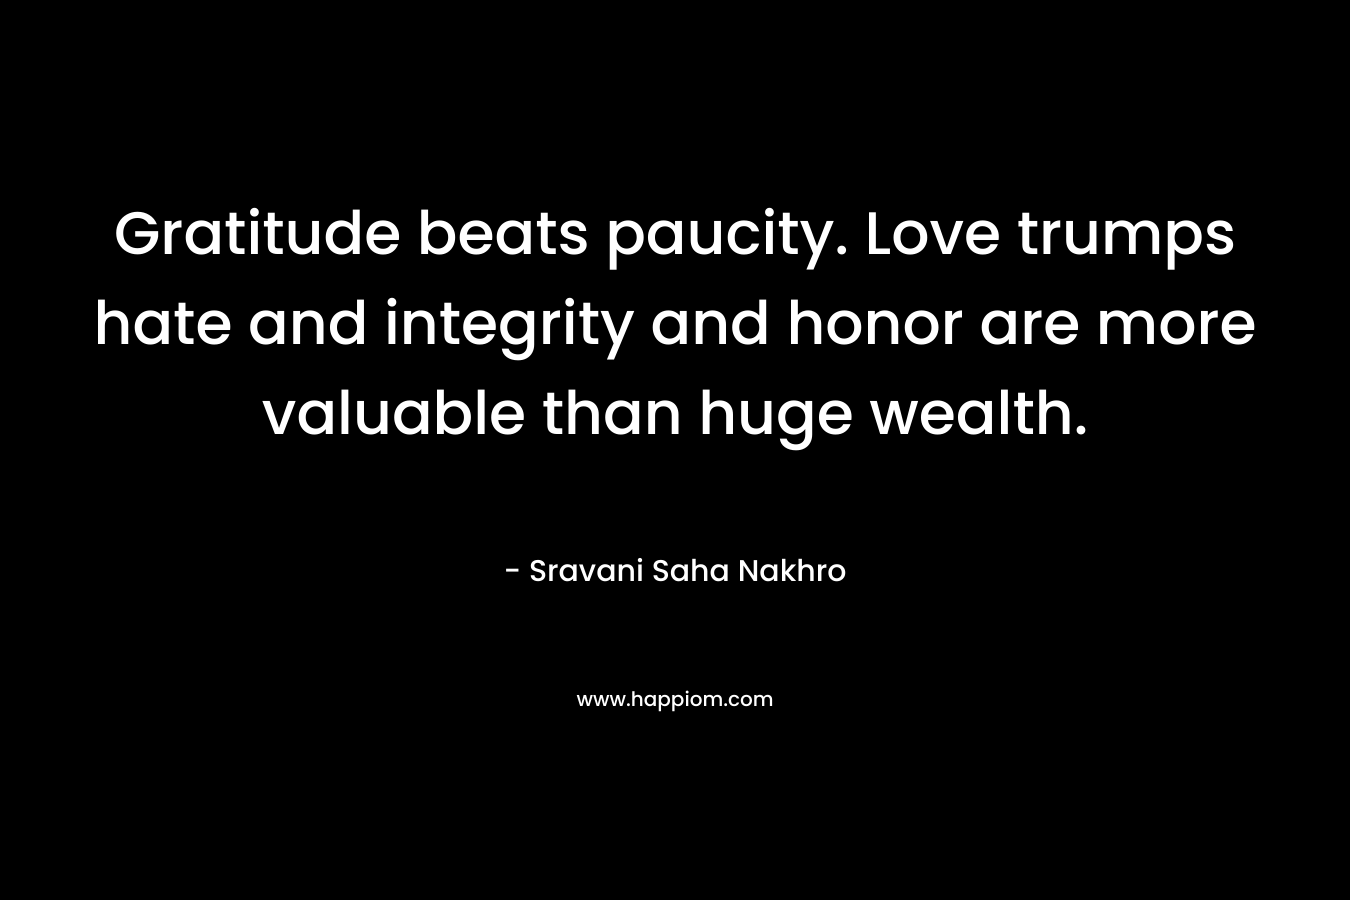 Gratitude beats paucity. Love trumps hate and integrity and honor are more valuable than huge wealth.